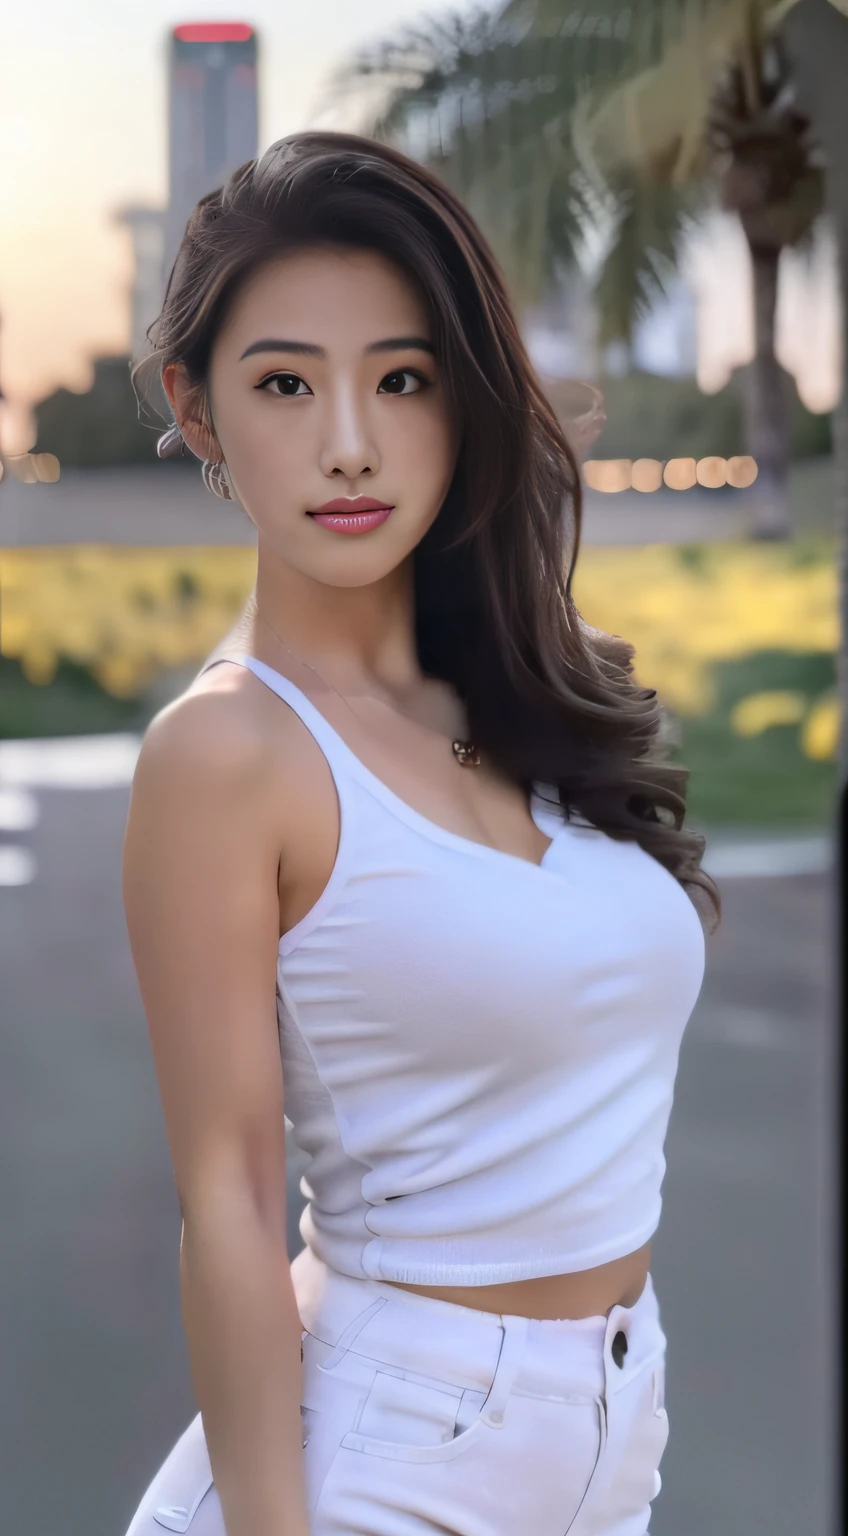 Photo Quality、An ultra-high picture quality、8K、32K、Summer cityscape、(top-quality、​masterpiece:1.2)、25 year old beautiful girl walking in the city、White sleeveless shirt、blue skinny jeans、、sony a7,3.Shooting with a 5mm lens、F 1.8 openings、Lighting Glow Effect、No retouching、Realistic raw photos、The skin texture is very detailed、without makeup、Background lighting is yellow、Good Style、Tall girls、ssmile、Peach butt